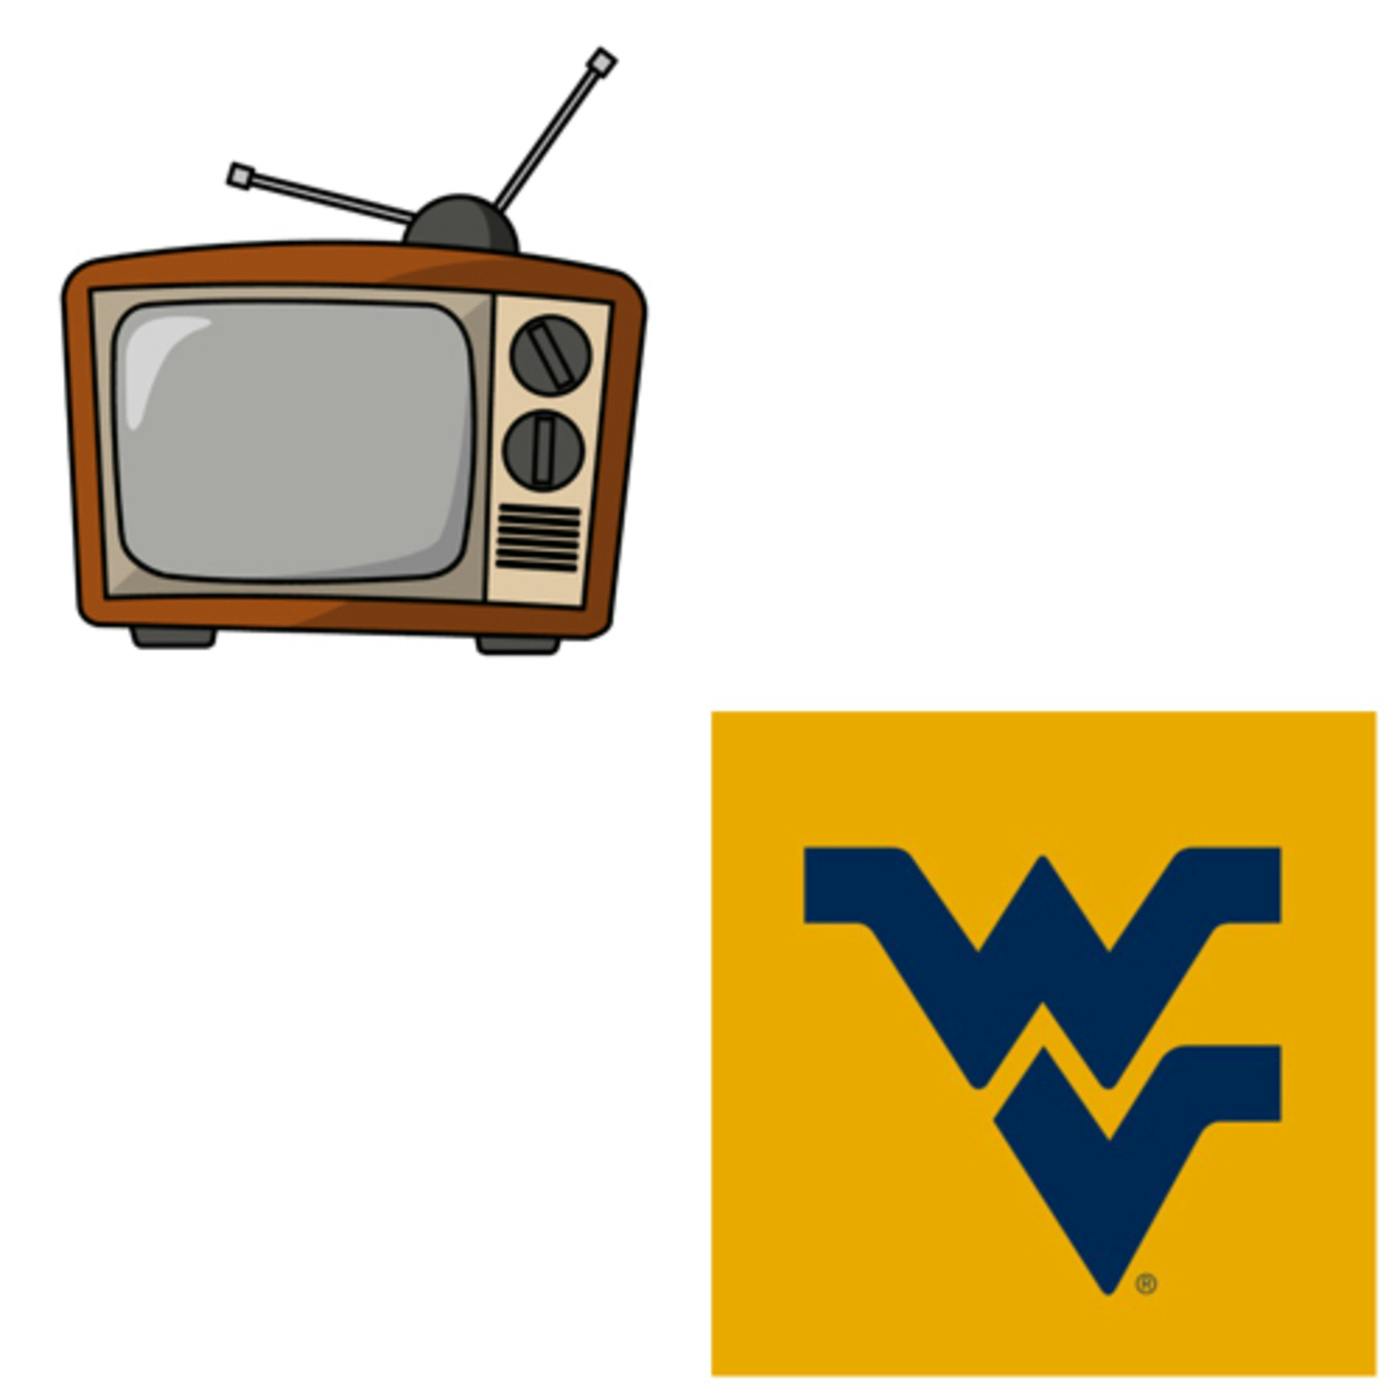 Ep. 192 - TV Shows & Return of “5 On It” & WVU Sports